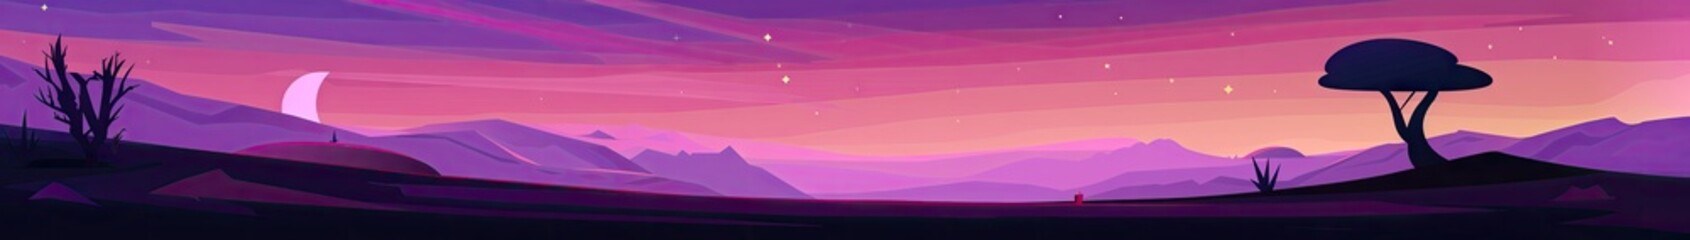 simple cartoon vector art, site of ritual for the amethyst tree of magic, desert at dusk, simple and few shapes and lines  